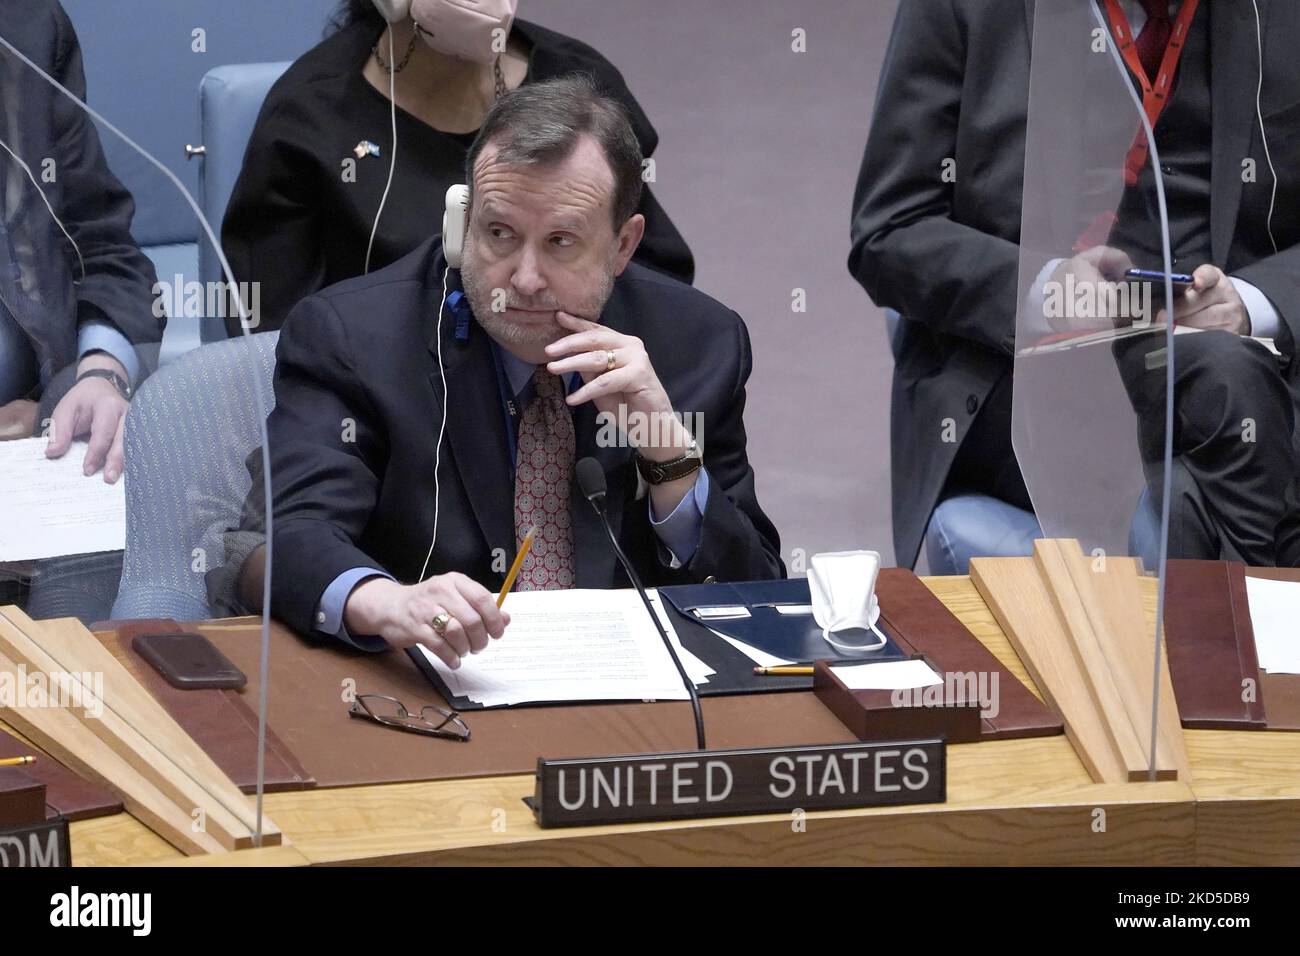 Richard M. Mills, Deputy Representative of the United States of America to the United Nations listens during a Security Council Meeting addressing the Russian invasion of Ukraine at the United Nations Headquarters on March, 18, 2022 in New York City, USA. Increasingly concerned about the invasion and the cost of civilian lives, members of the Security Council vehemently demanded that a pathway for immediate humanitarian relief and peace be set. (Photo by John Lamparski/NurPhoto) Stock Photo